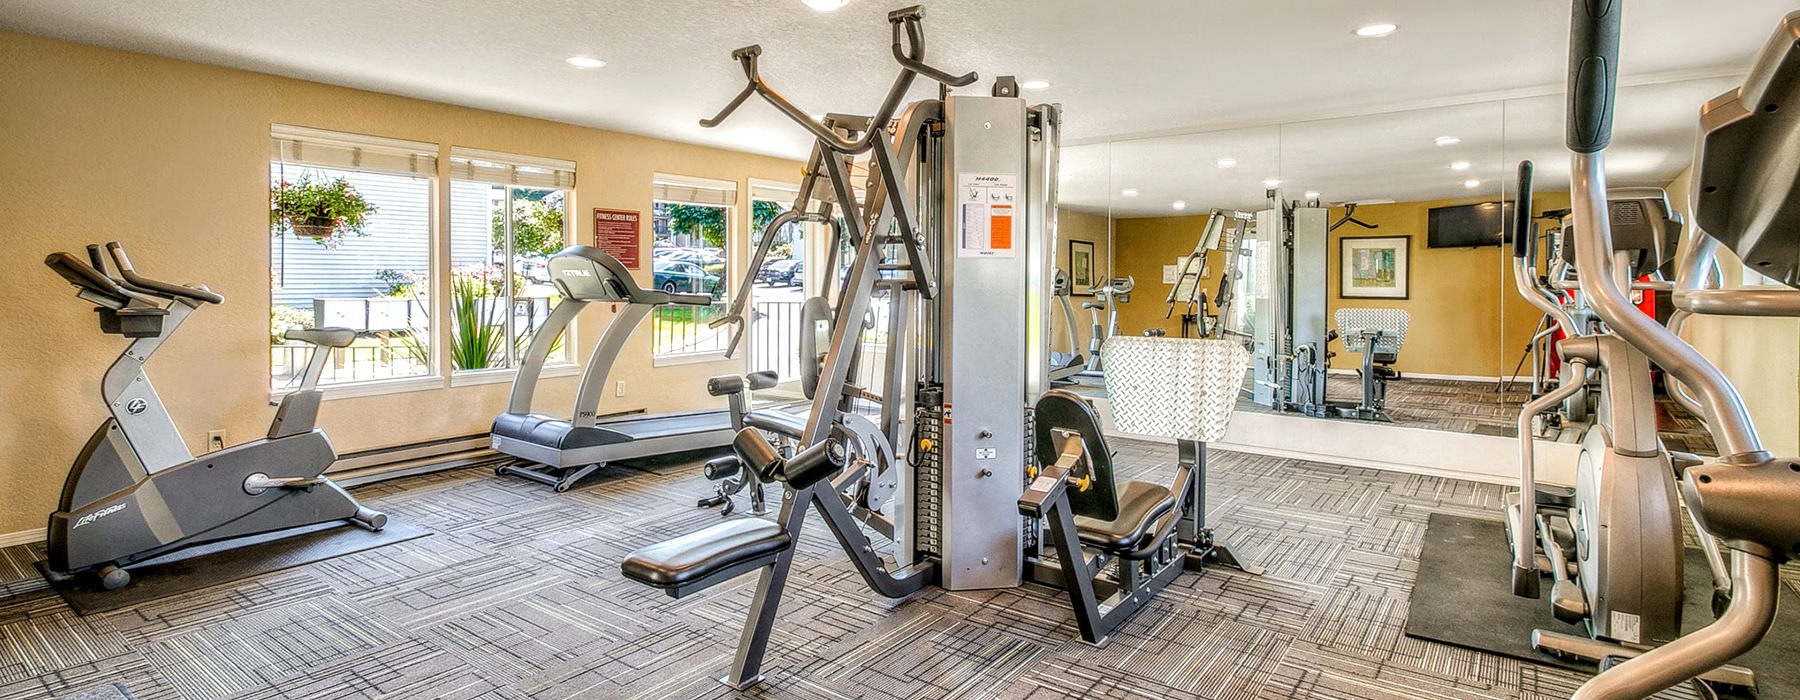 Fitness Center with weight machines and cardio machines